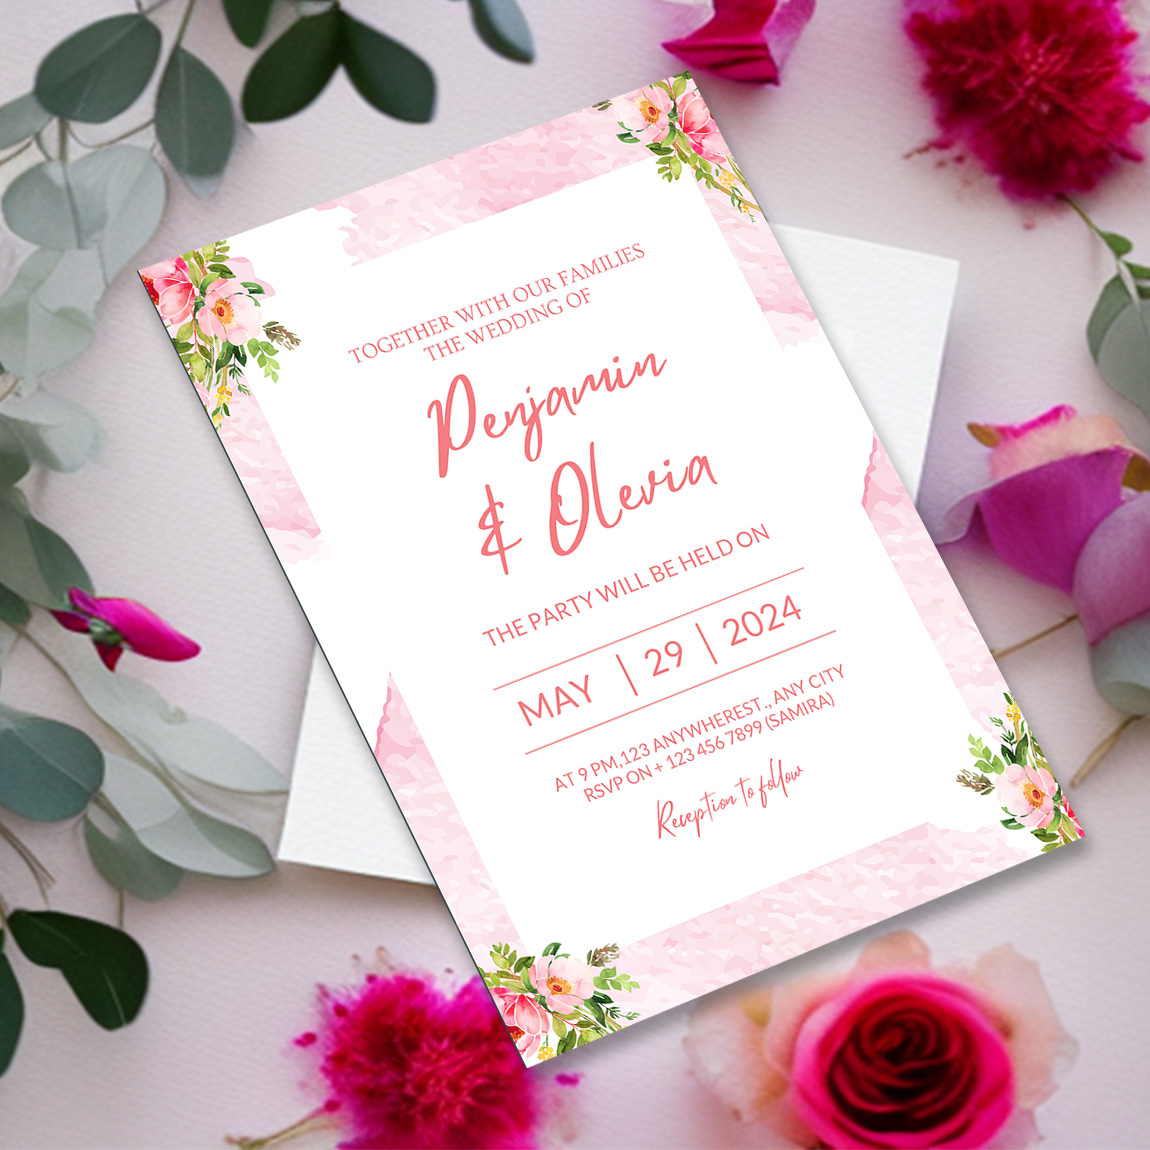 Image with charming wedding invitation in gold and pink tones with flowers.